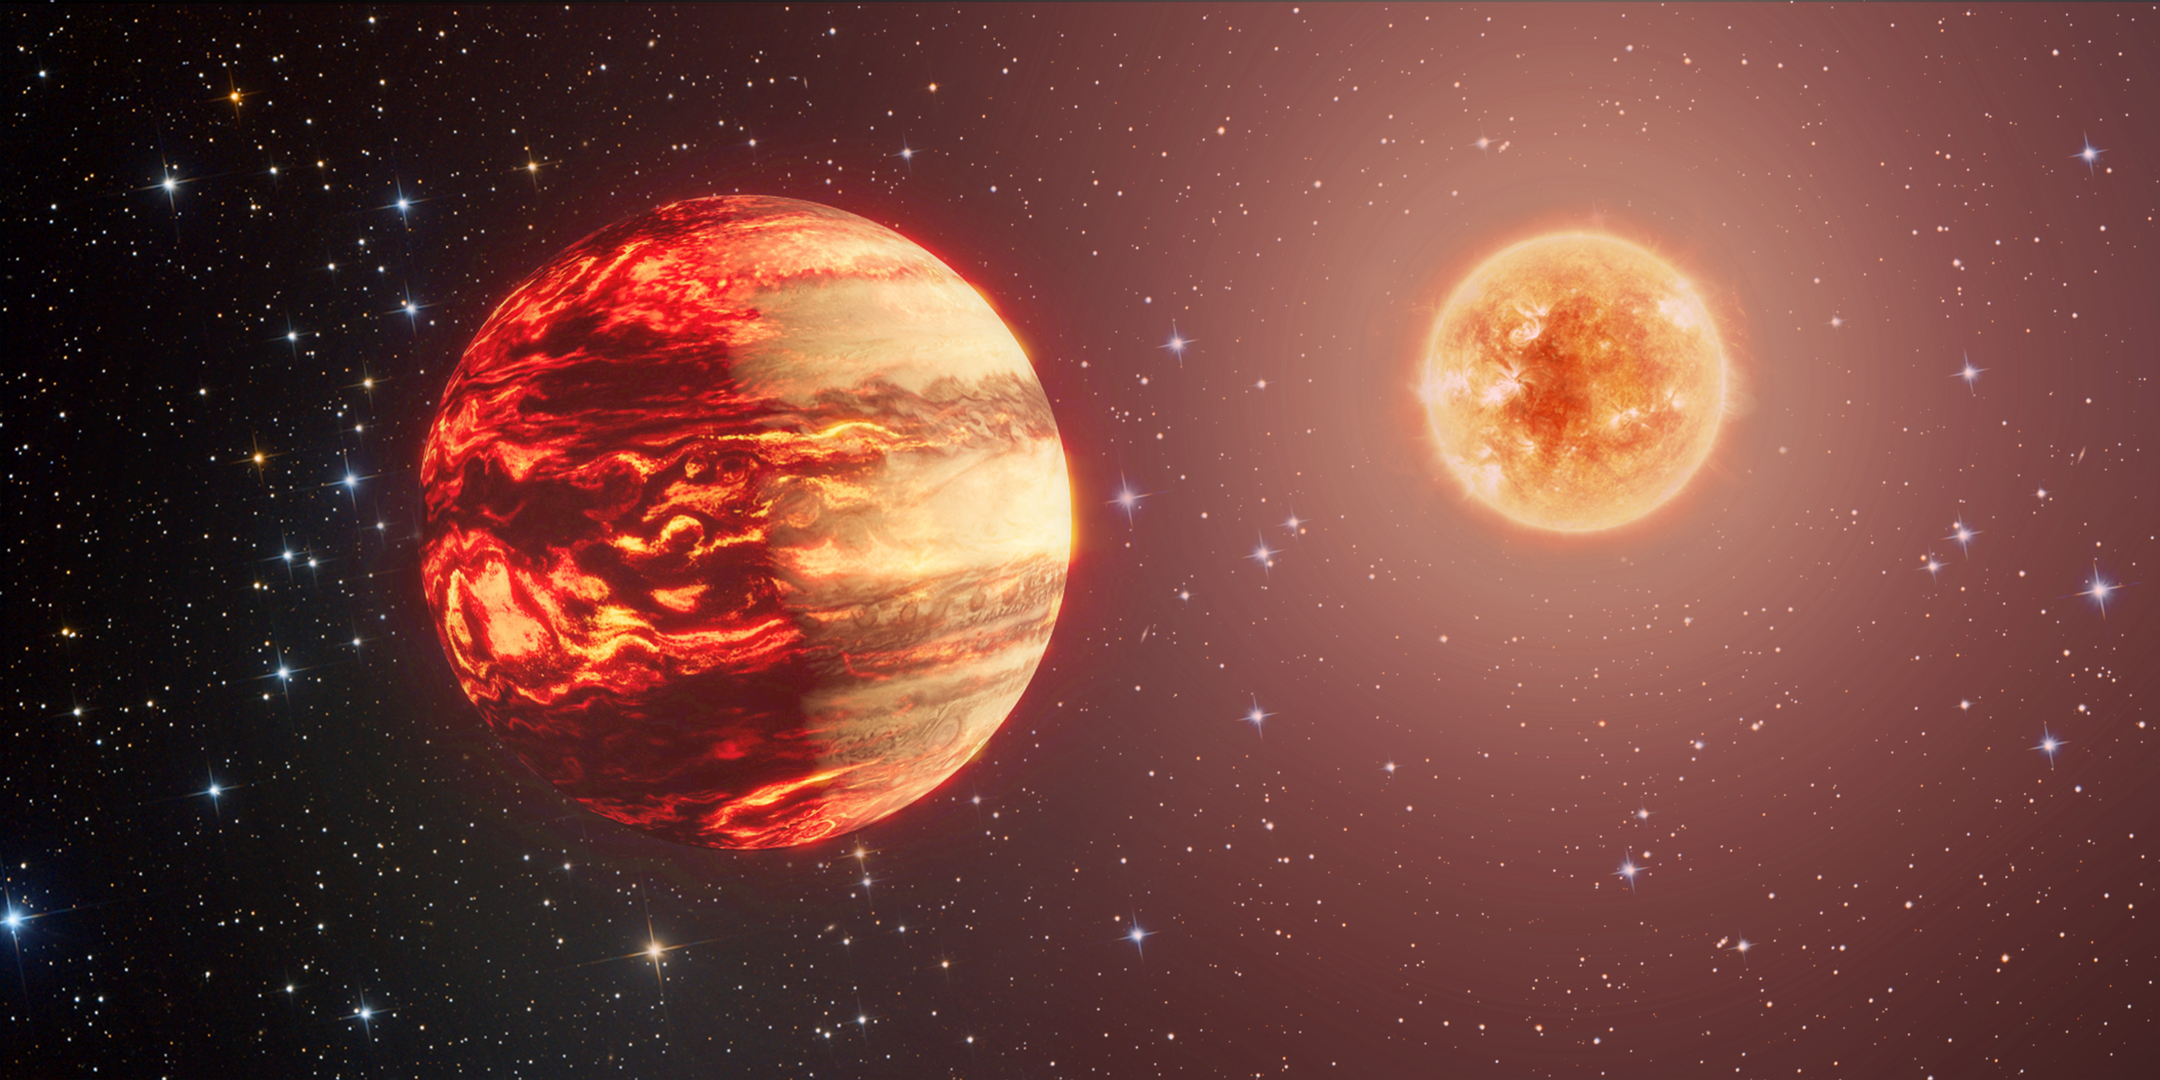 Red and brown dwarfs: The Very Large Telescope finds hidden companions of bright stars